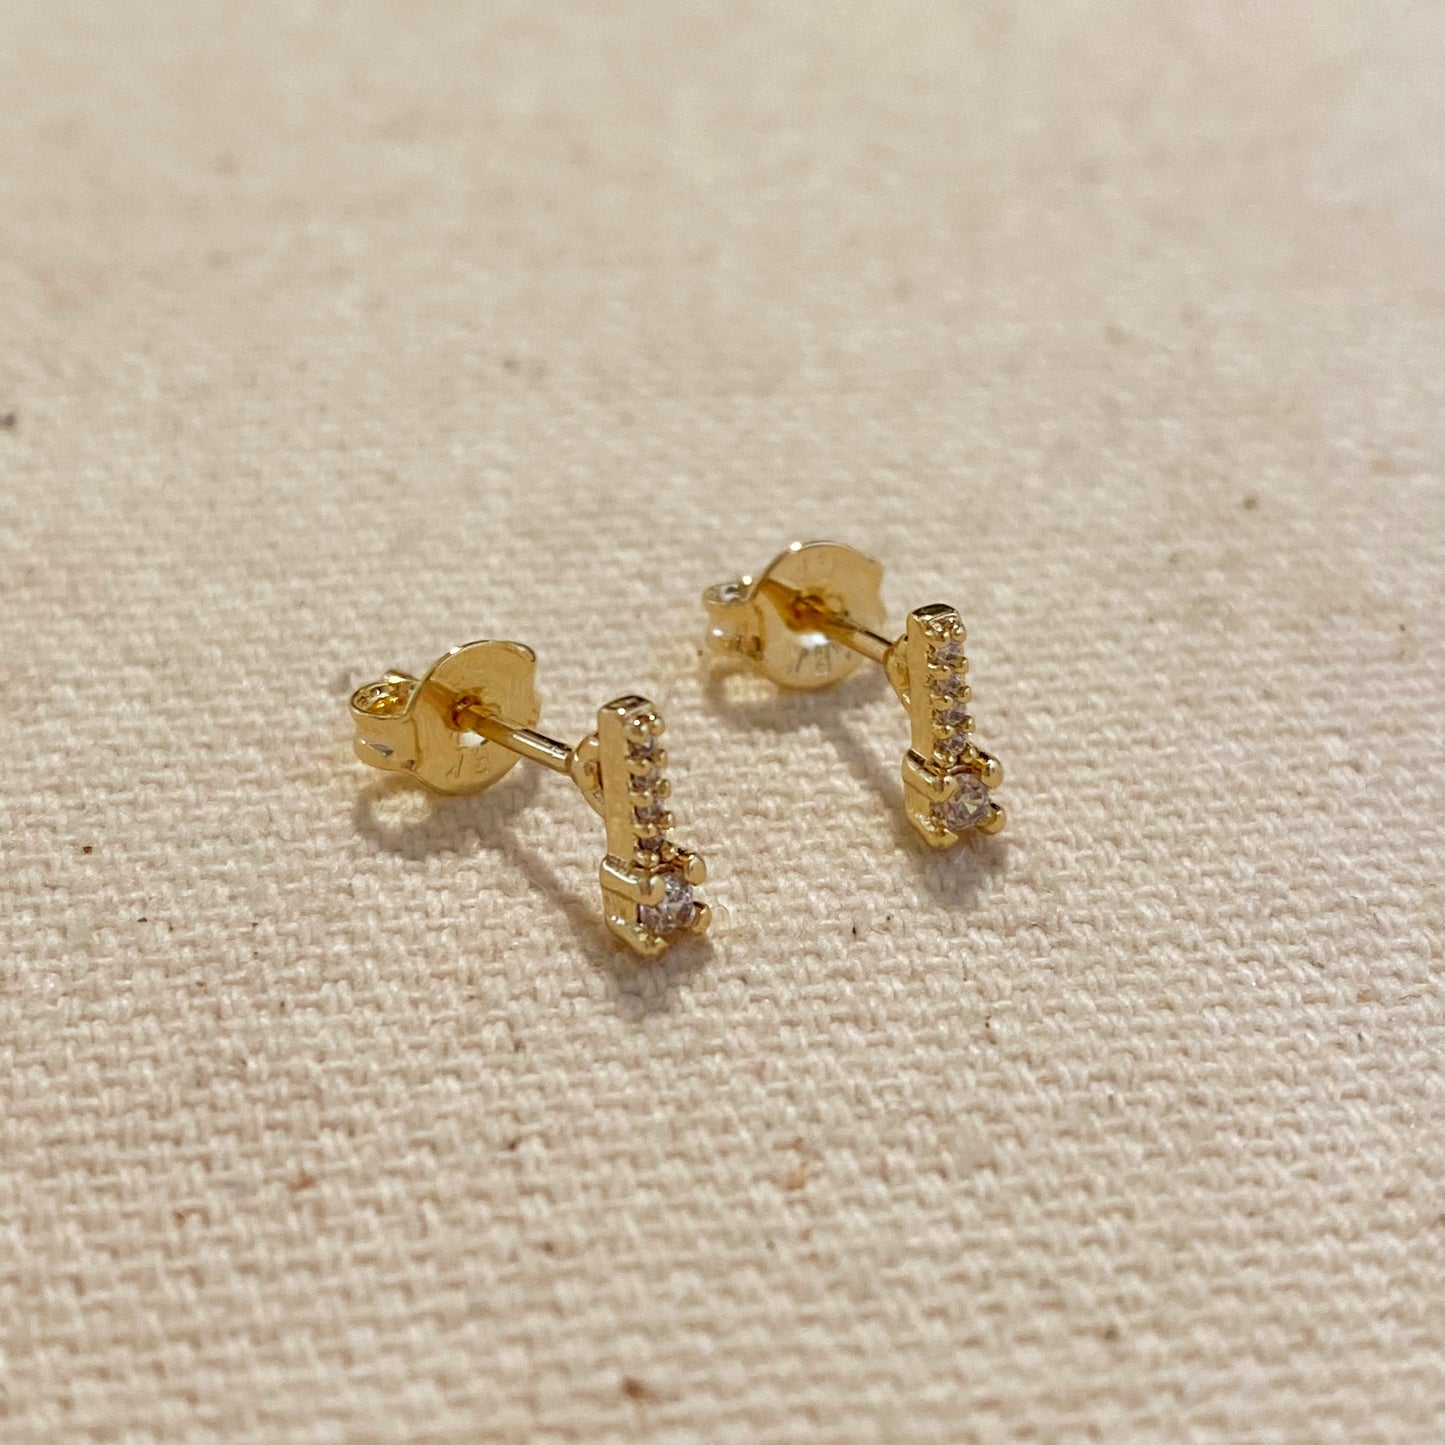 18k Gold Filled Bar Stud Earrings With Micro Cubic Zirconia Stones